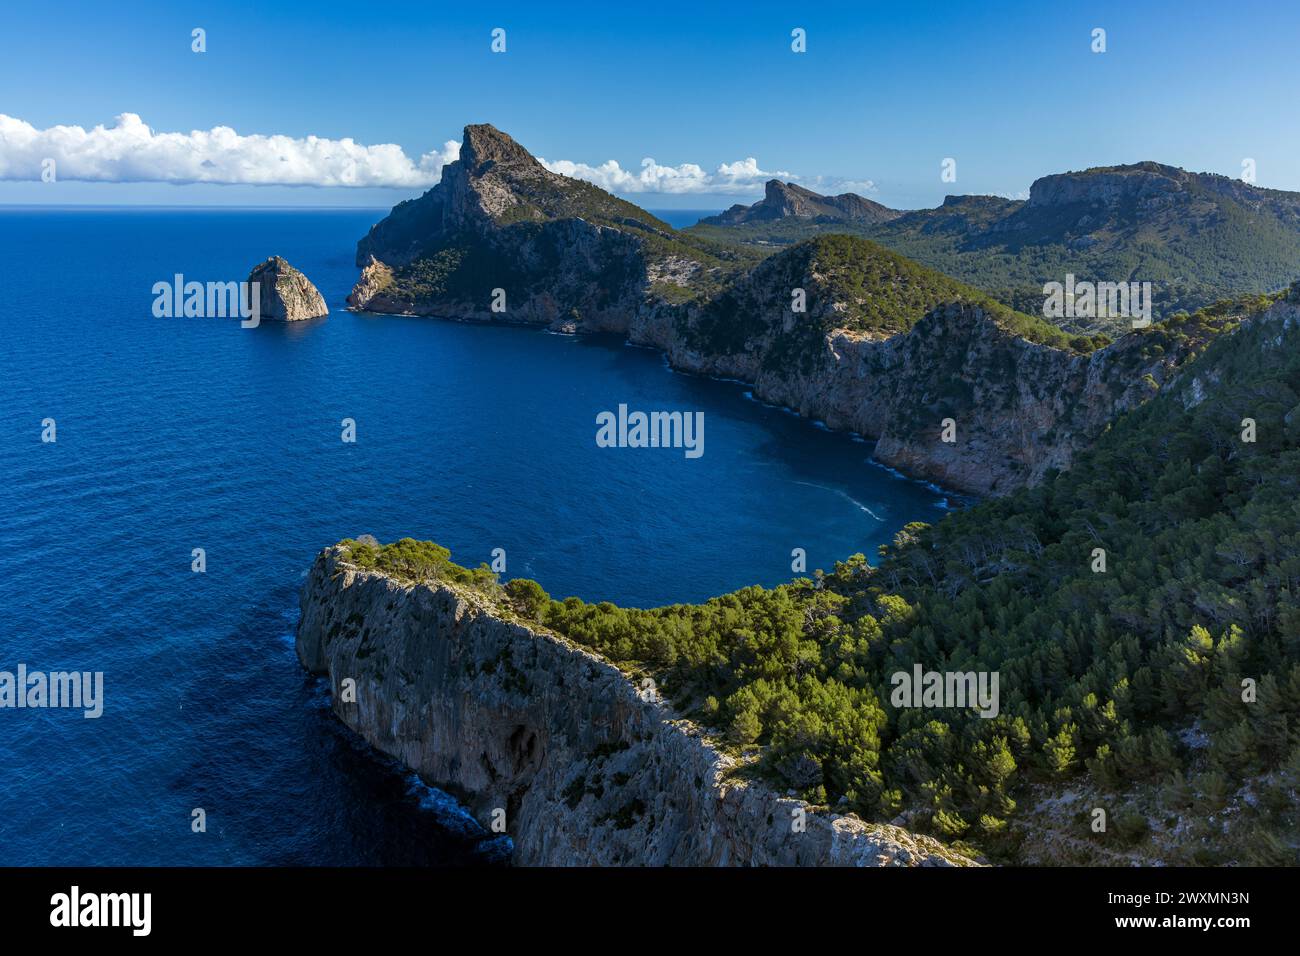 View from the famous viewpoint of Mirador de El Colomer, Mallorca, Balearic Islands Stock Photo